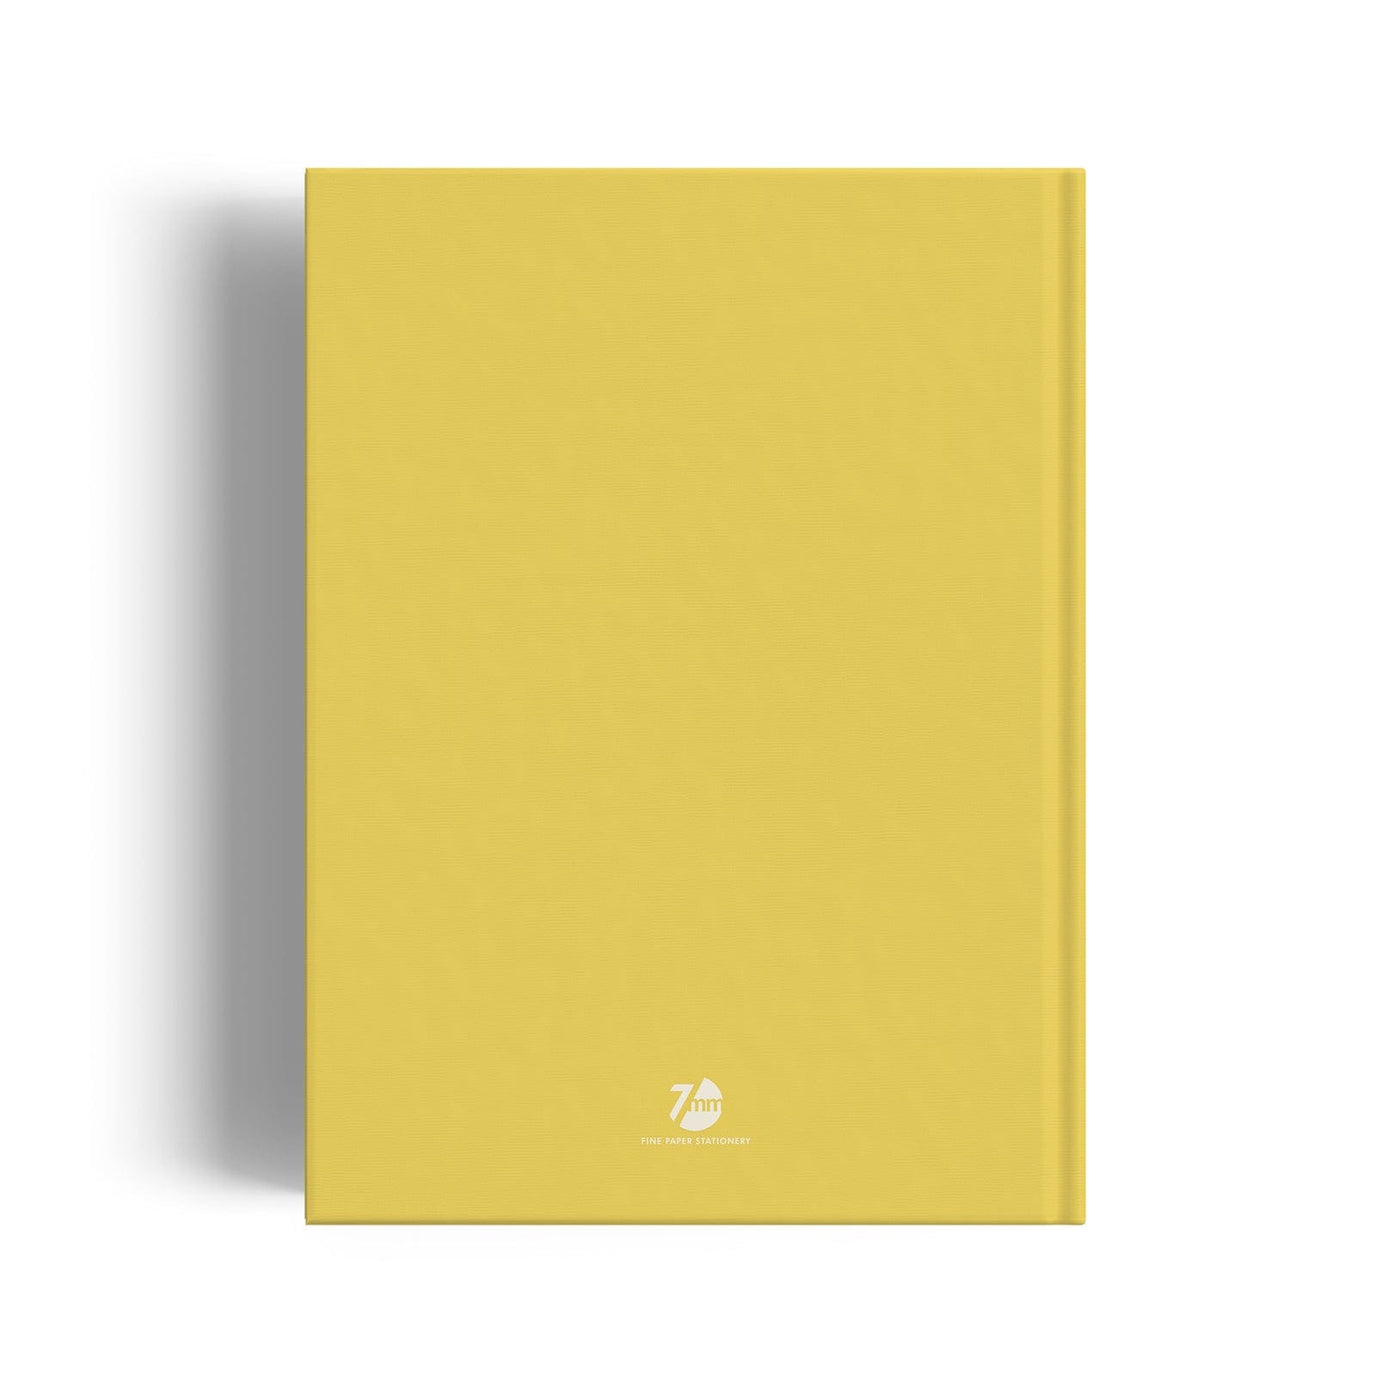 Dream Big A5 Notebook  160 pages-Ruled